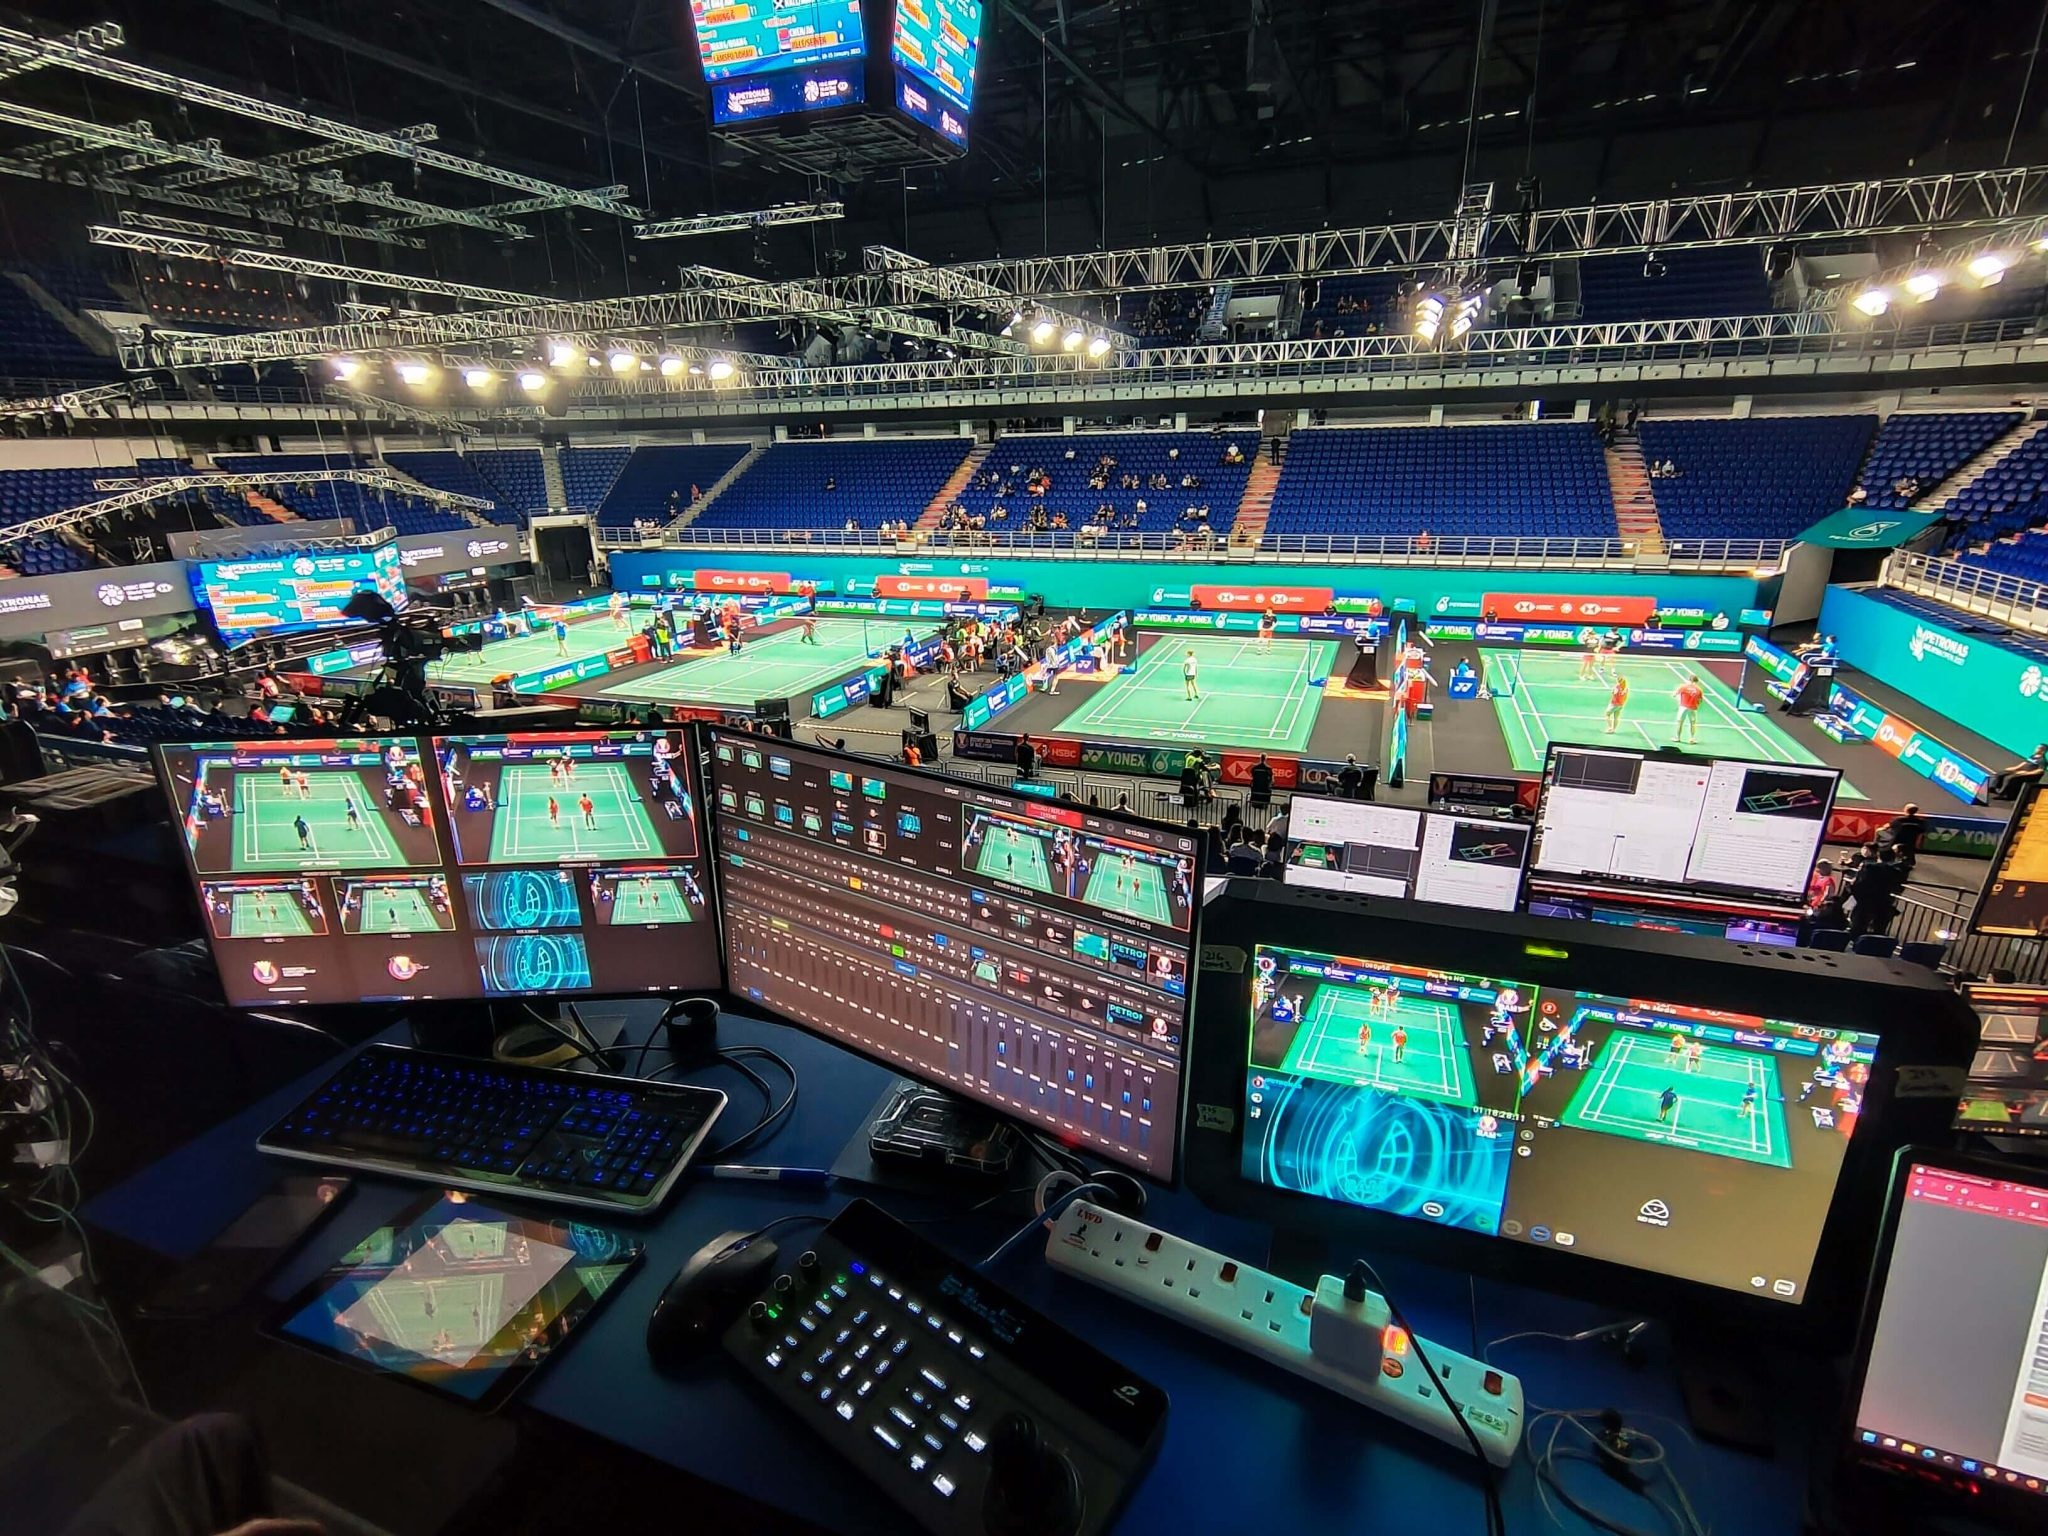 Overview on live sports badminton from media area